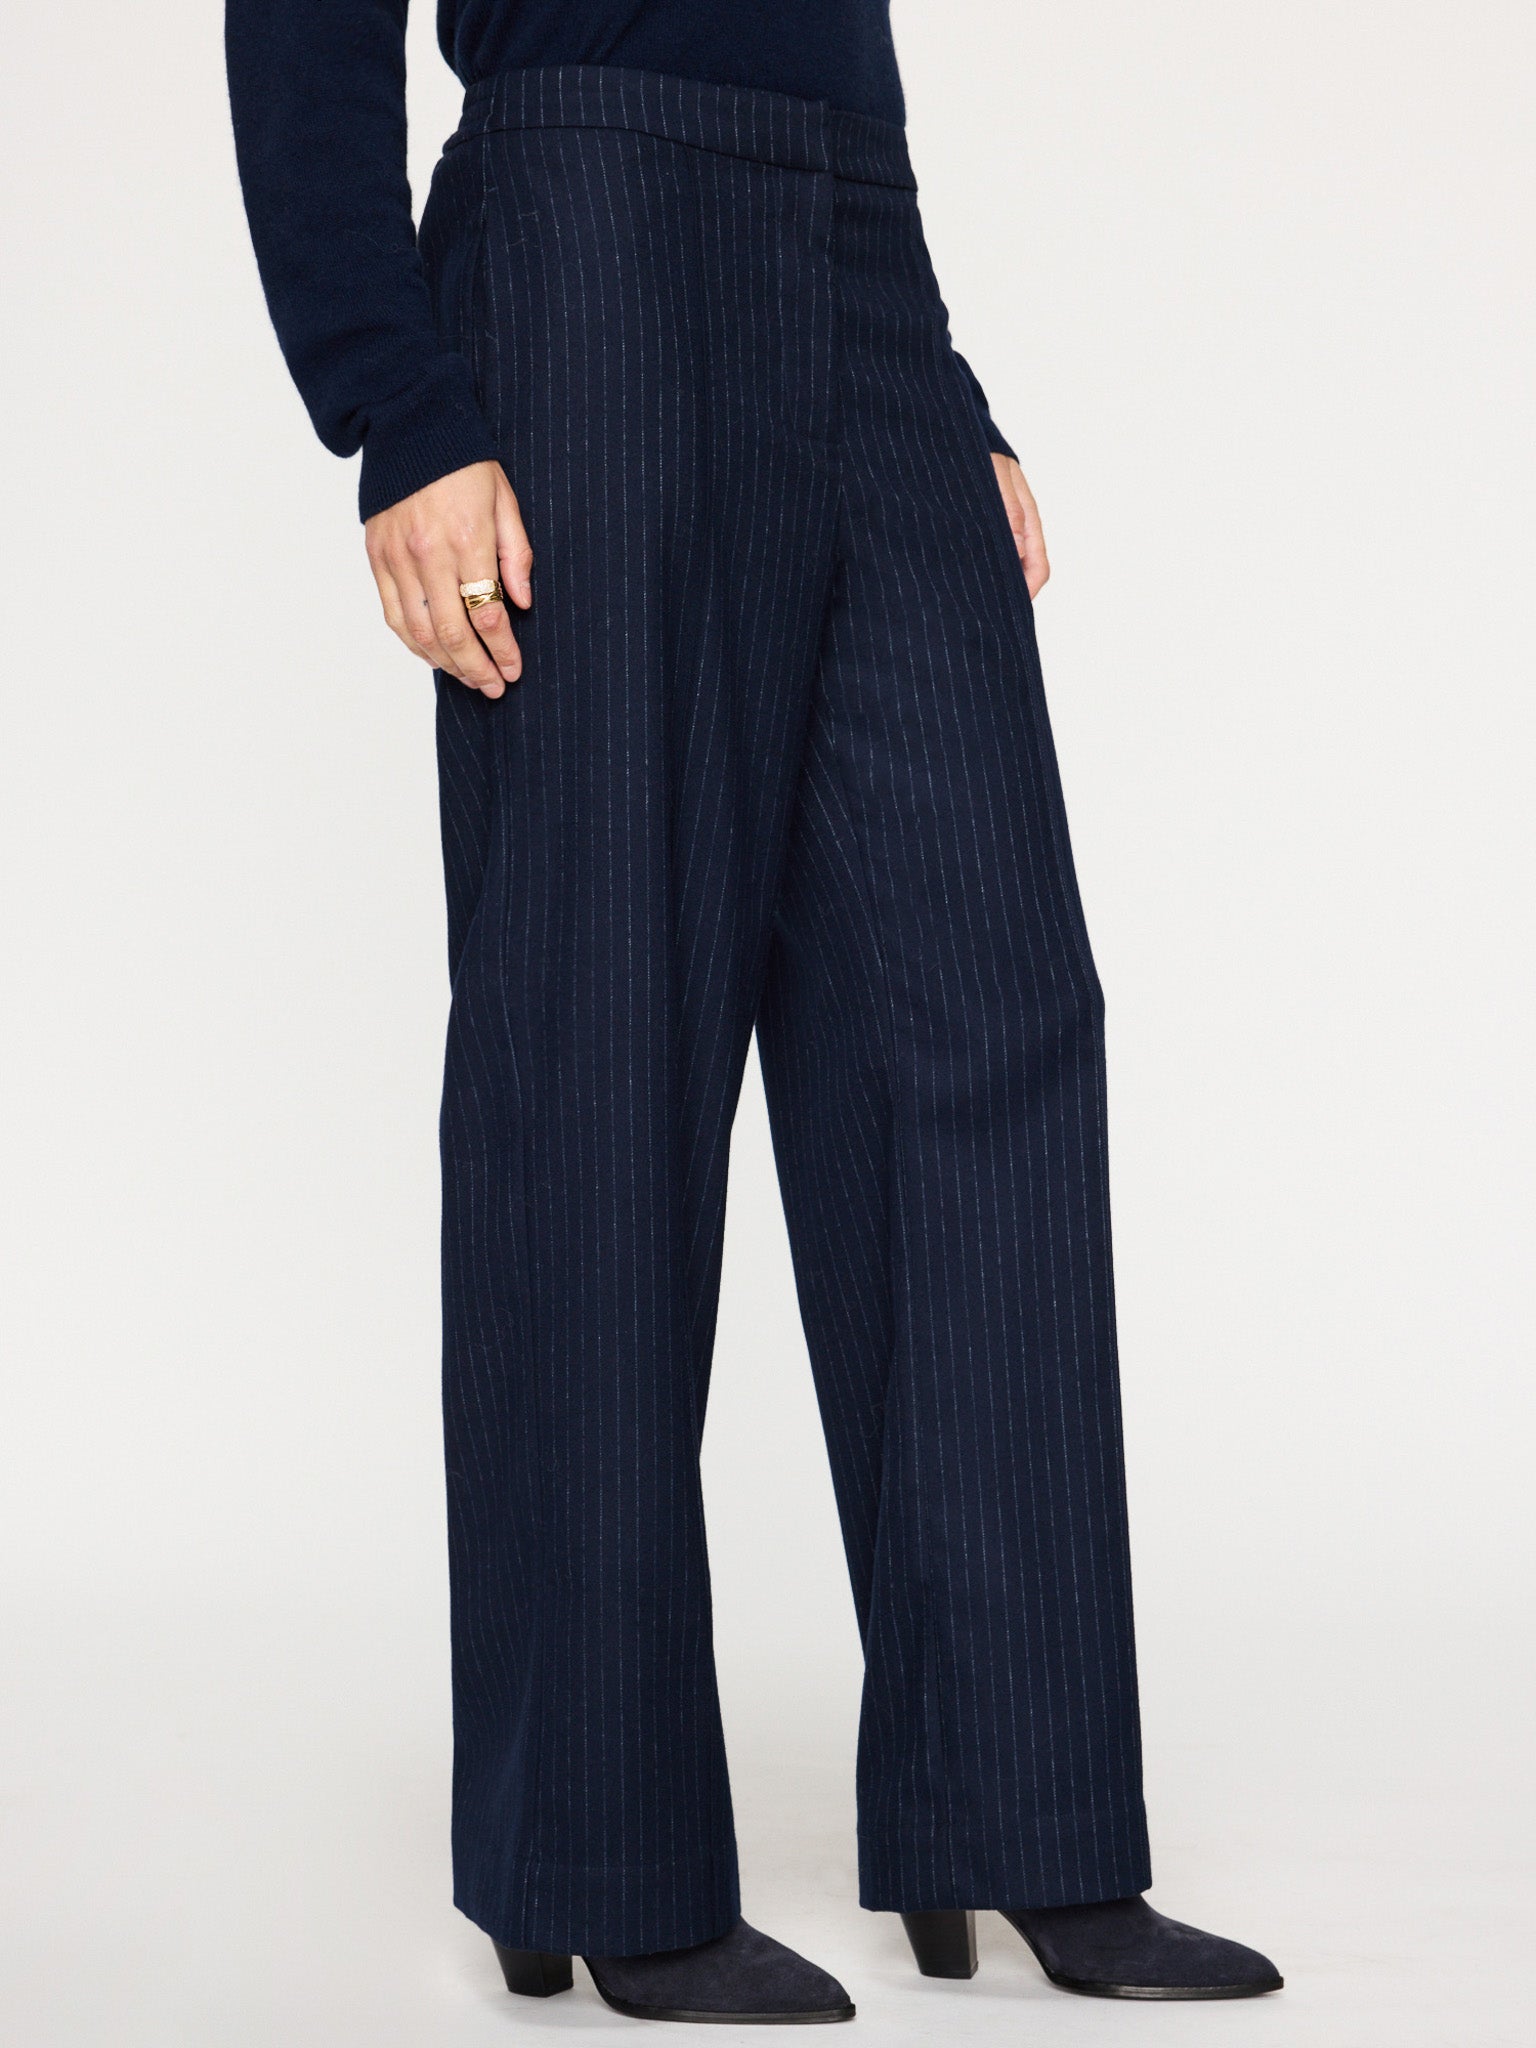 Olena navy pinstripe high rise straight leg pant side view